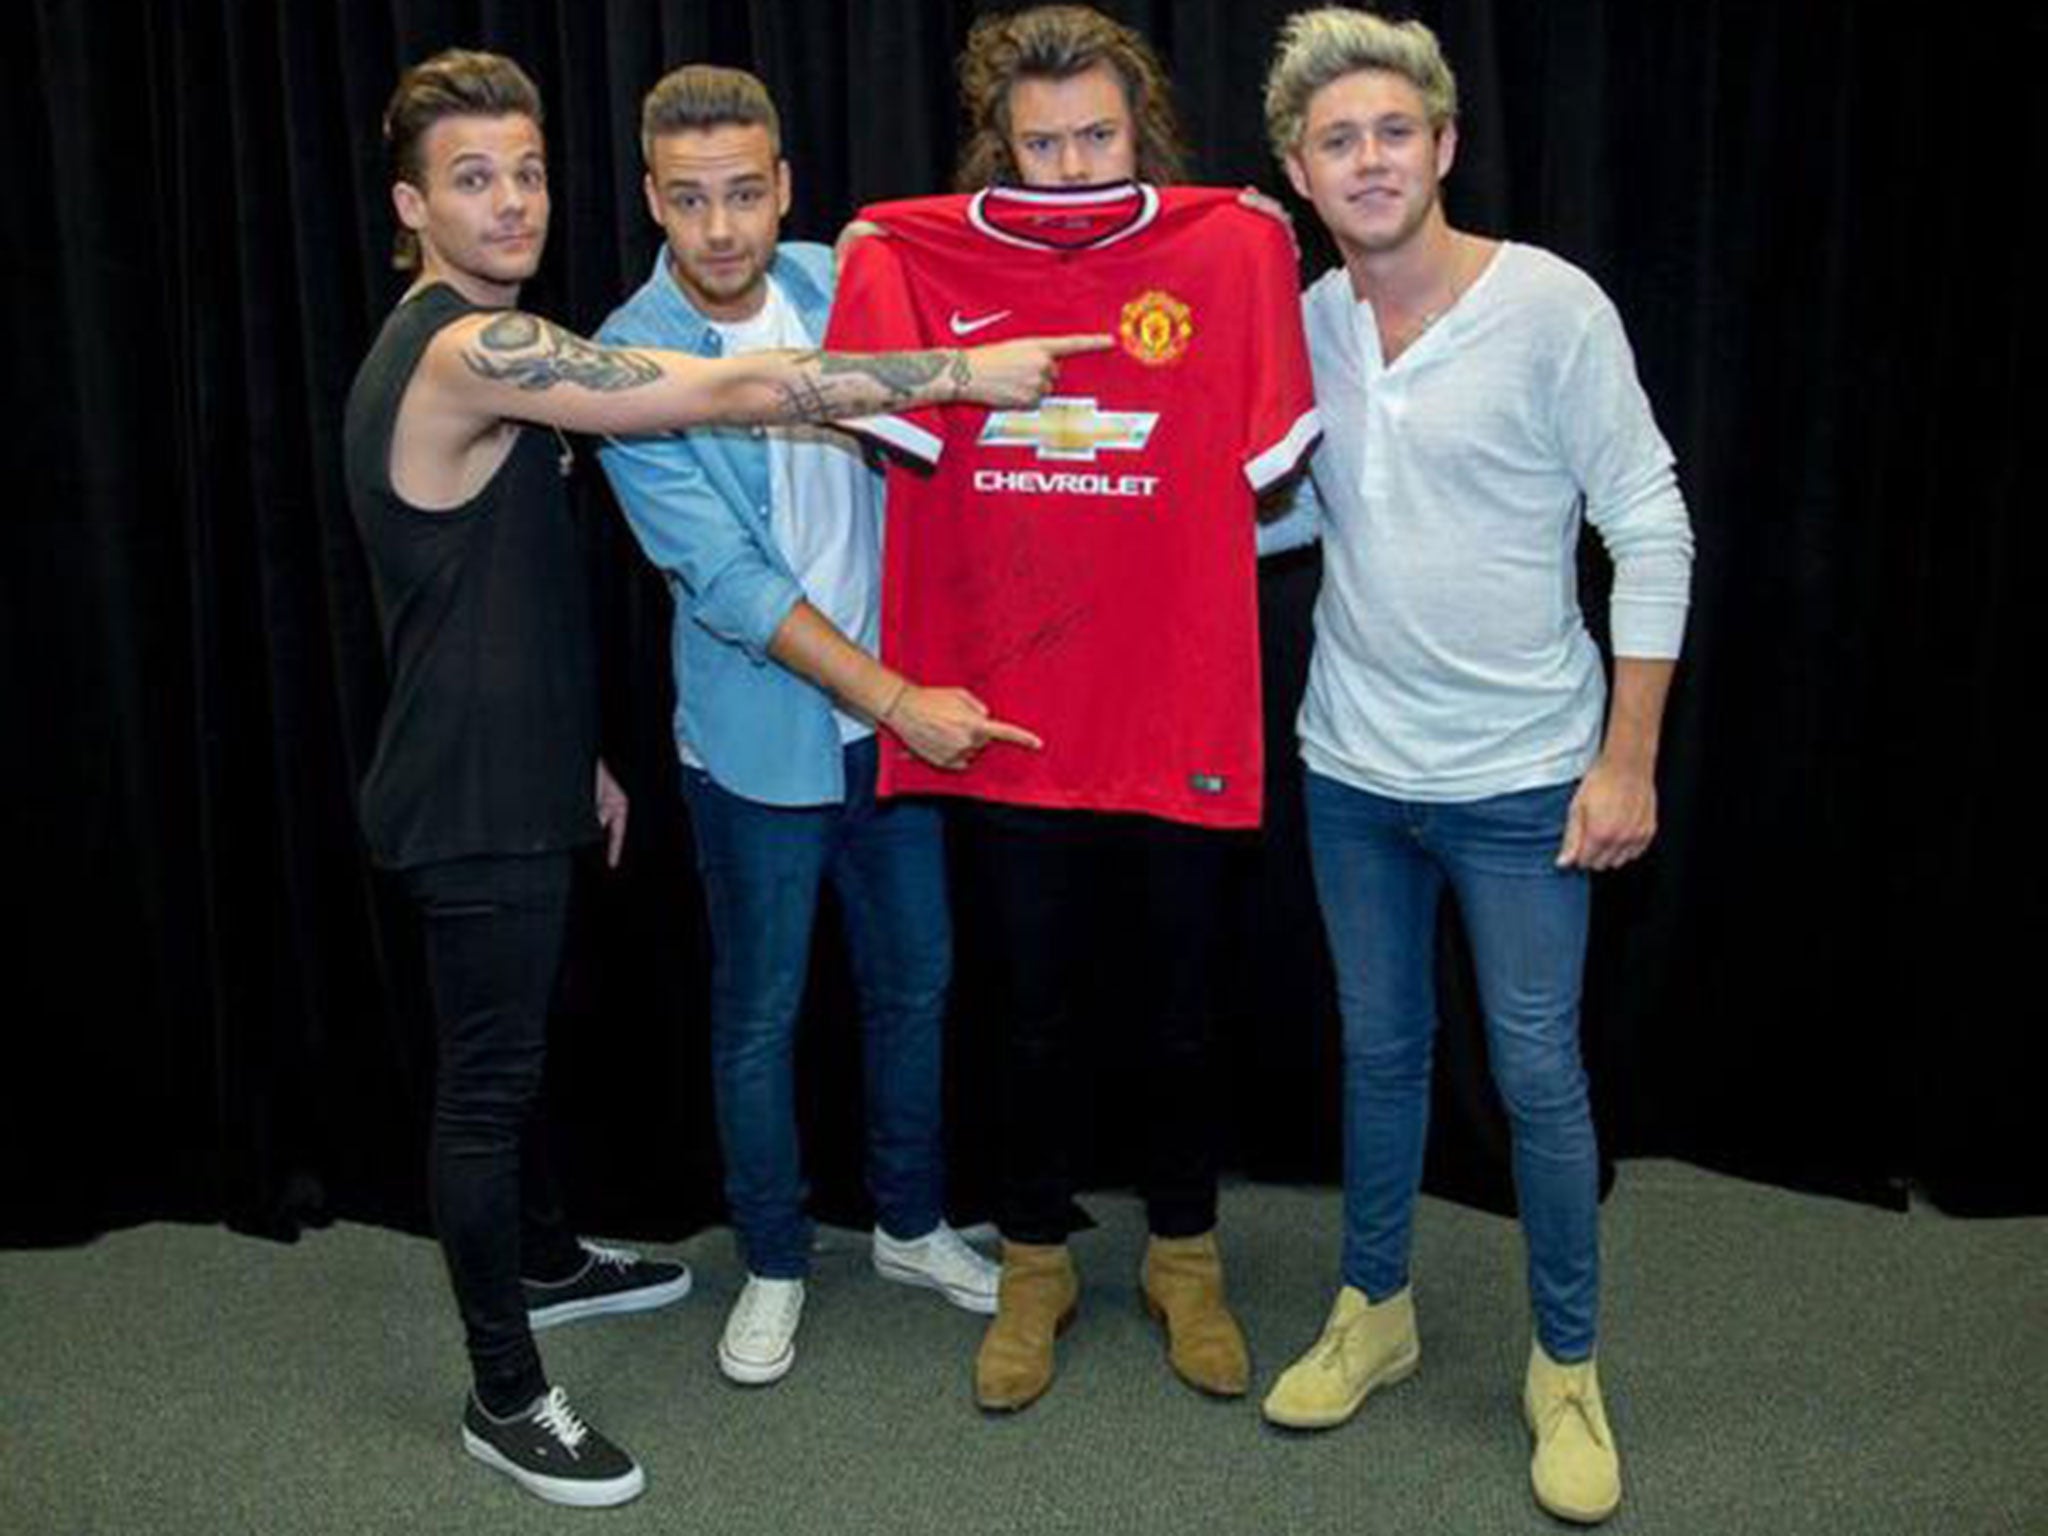 One Direction pose with a Manchester United shirt